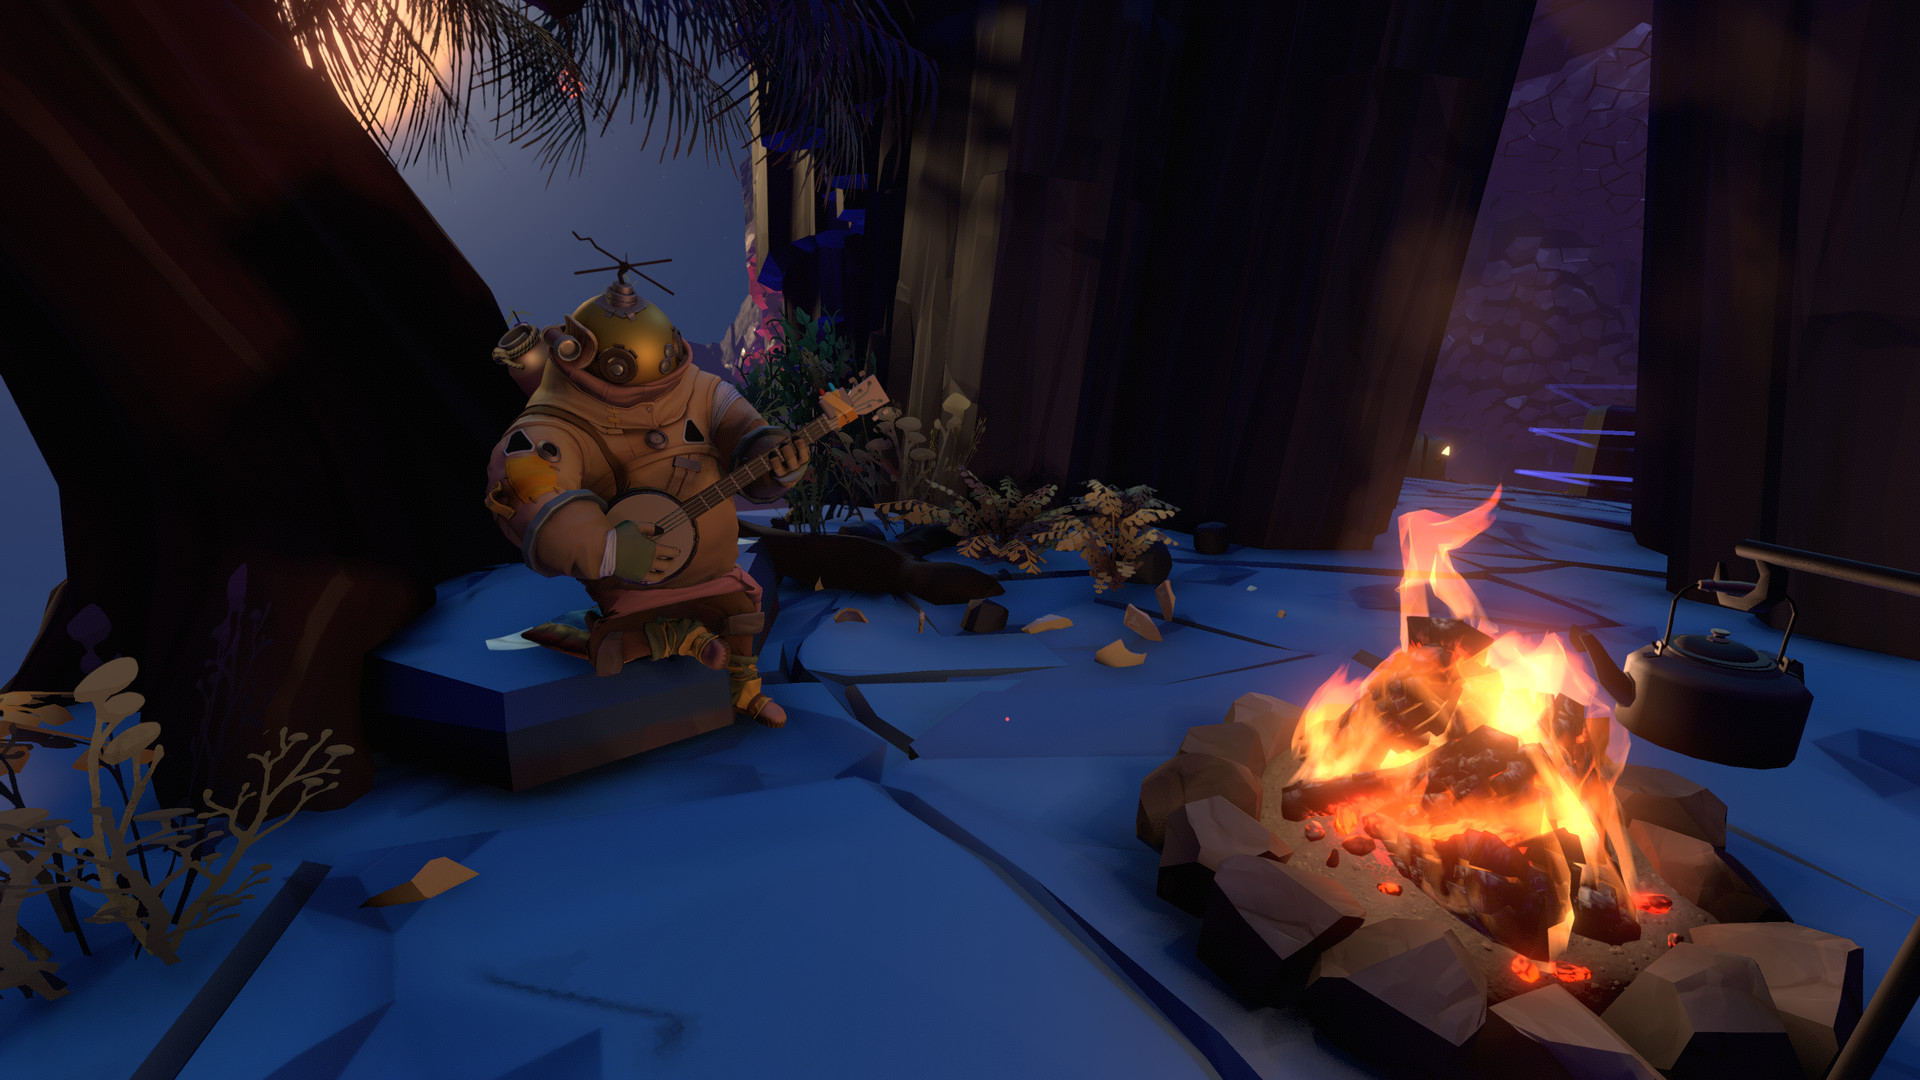 Outer Wilds  Download and Buy Today - Epic Games Store